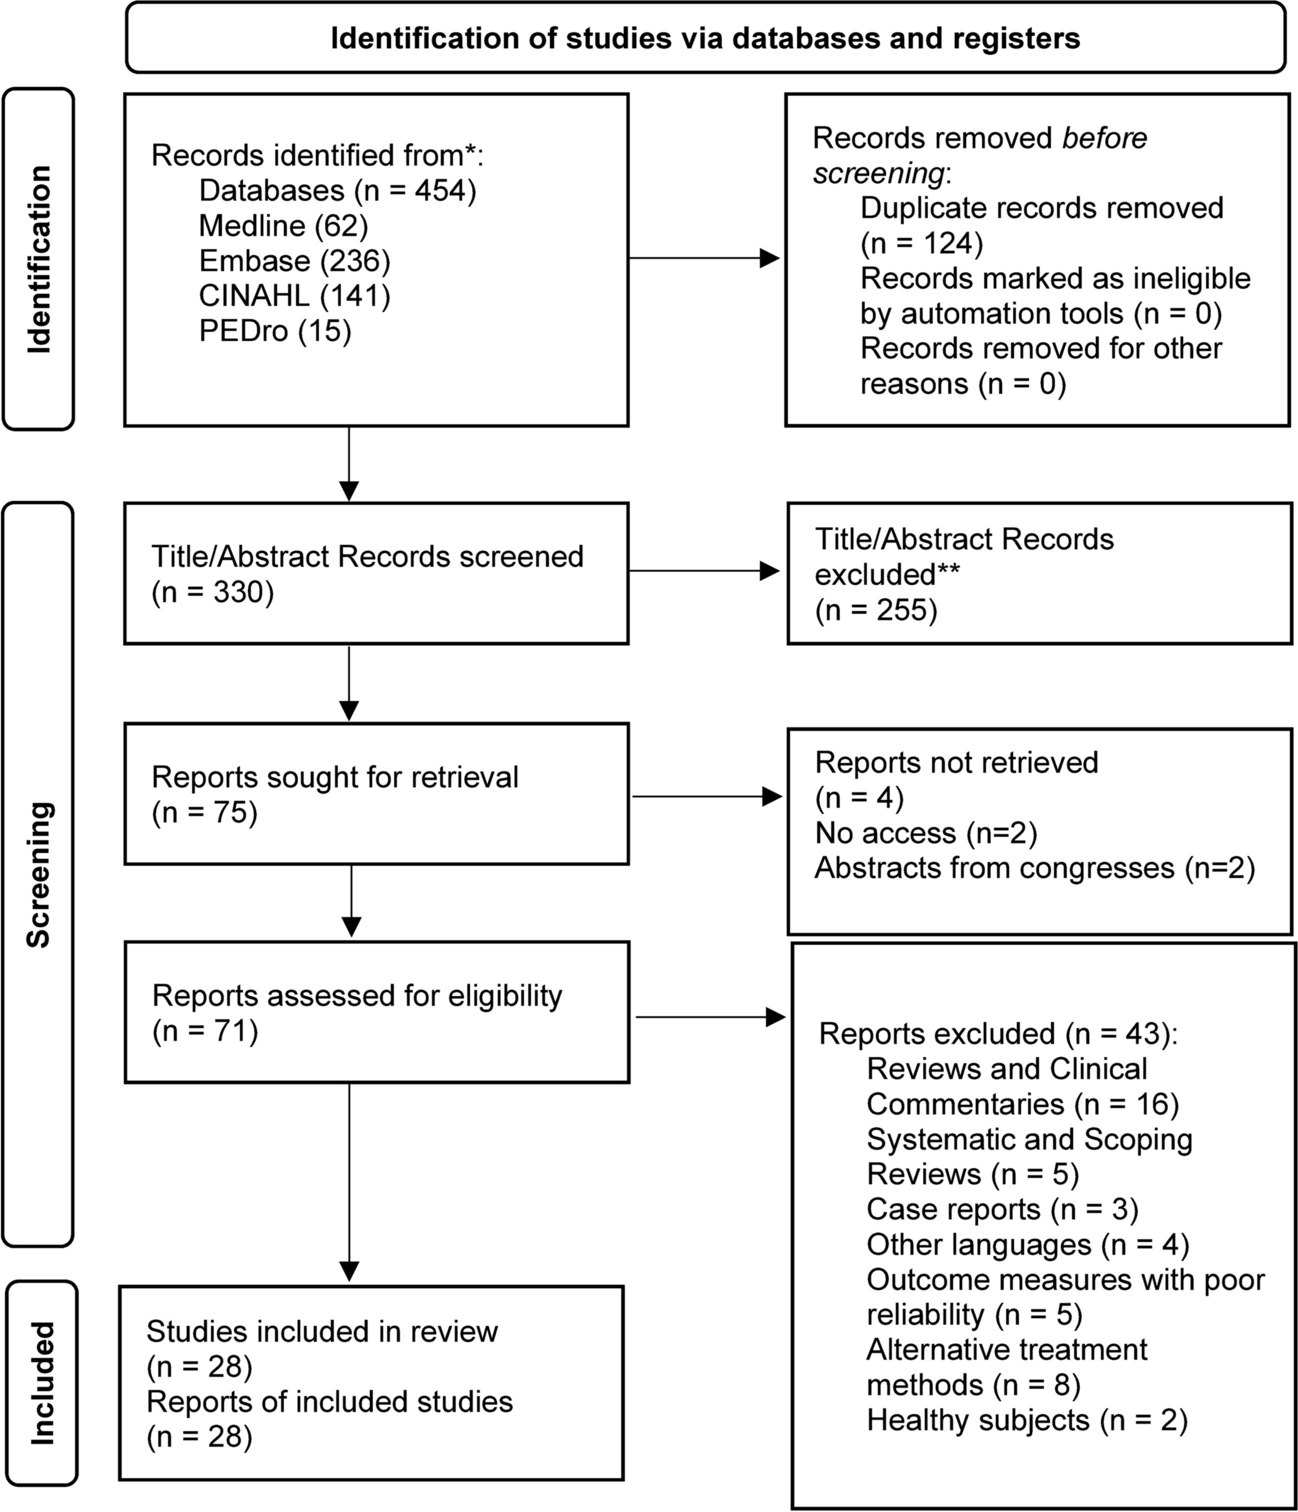 Diastasis Recti Abdominis Rehabilitation in the Postpartum Period: A Scoping Review of Current Clinical Practice